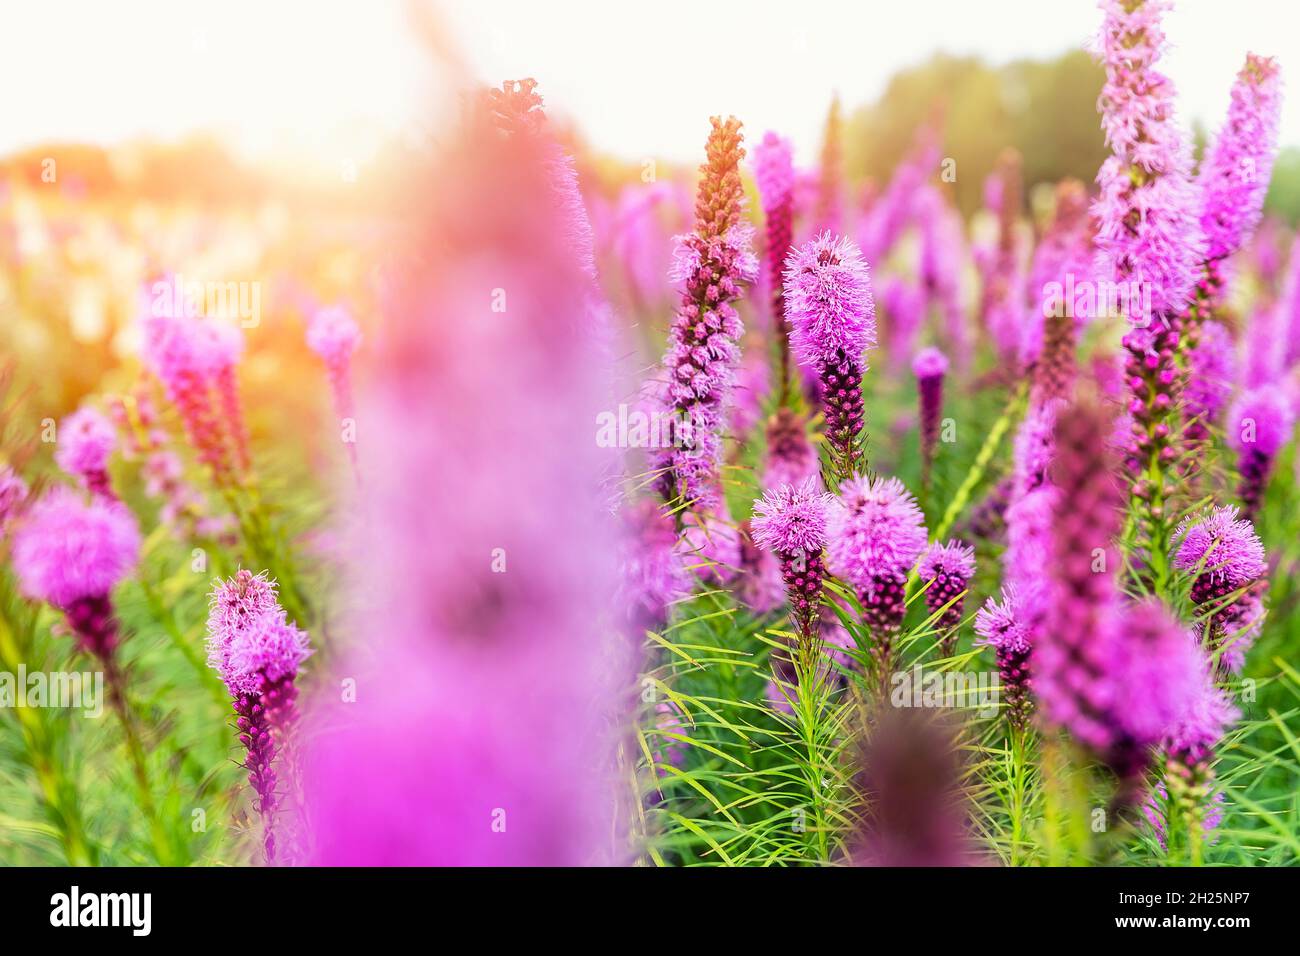 Beautiful abstract scenic landscape view of blooming purple liatris spicata or gayfeather flower meadow in rays of sunset warm sun light. Wildflower Stock Photo